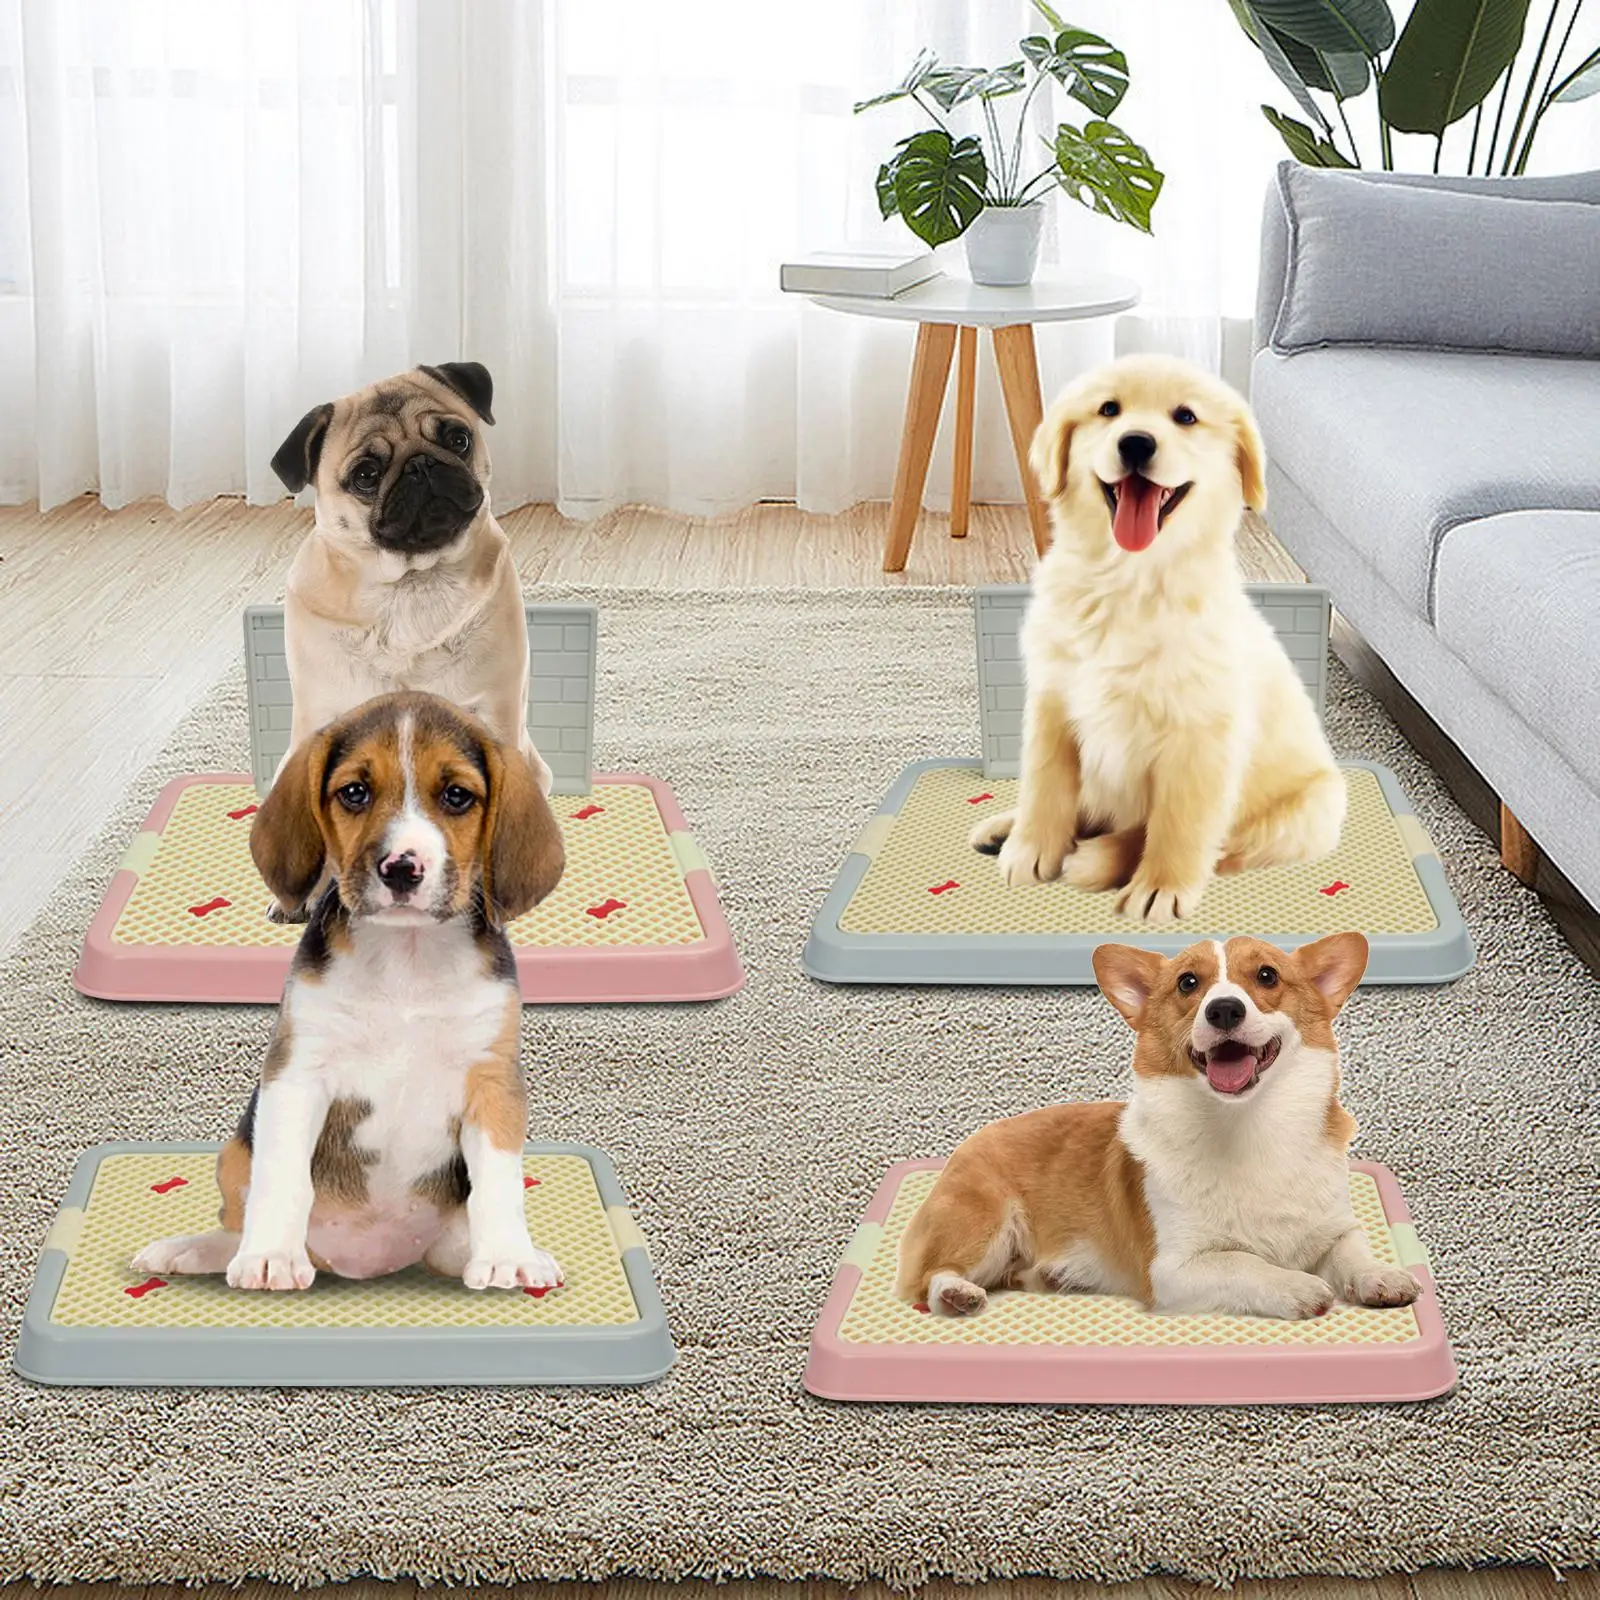 Dog Training Toilet Dog Potty Tray Cleaning Tool Removable Anti Splashing Trainer Corner for Kitten Dogs Cats Puppy Balcony Home